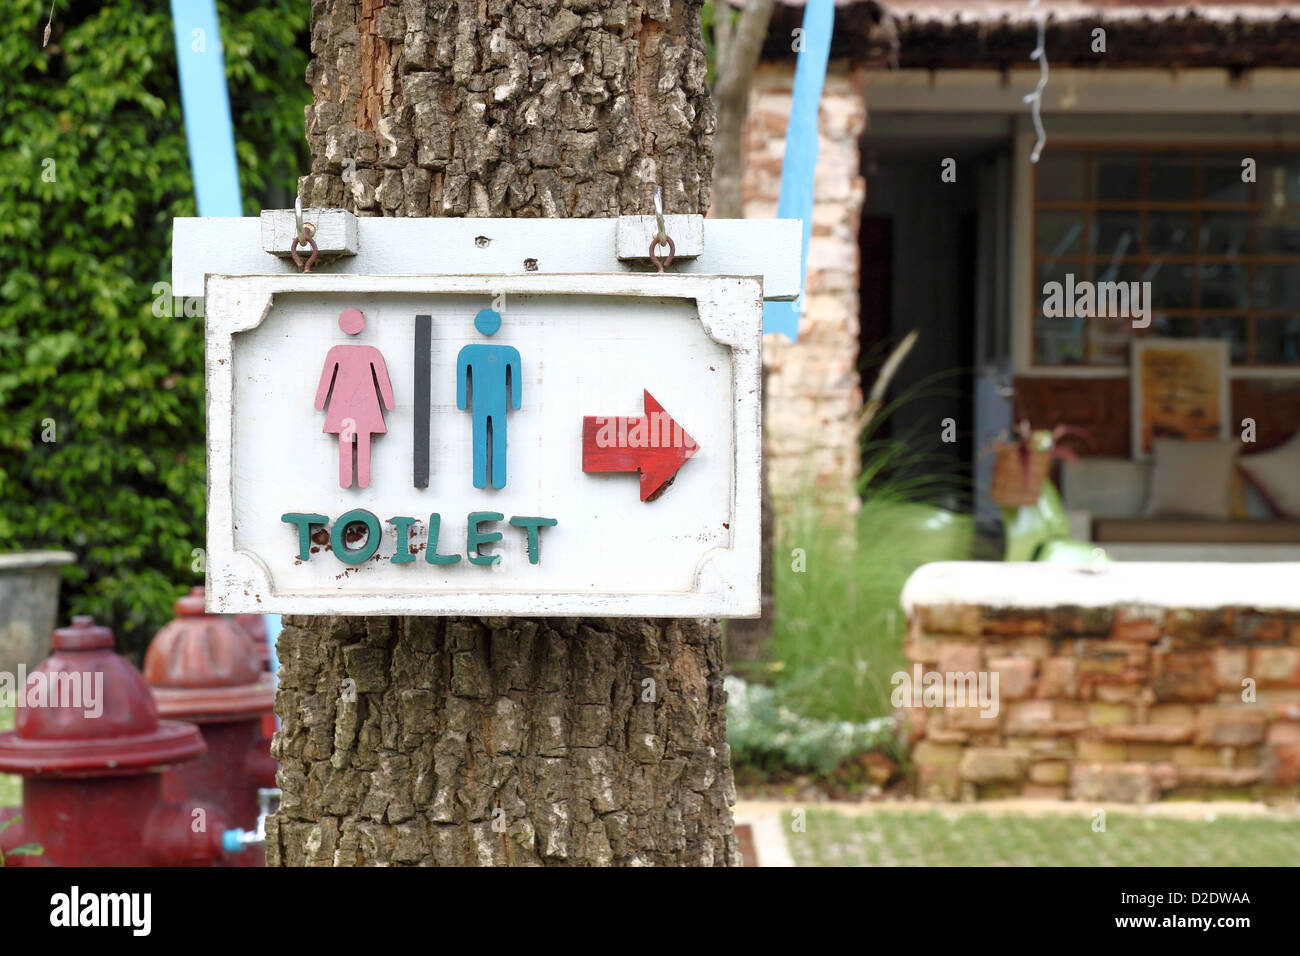 toilet sign with arrow on the tree Stock Photo